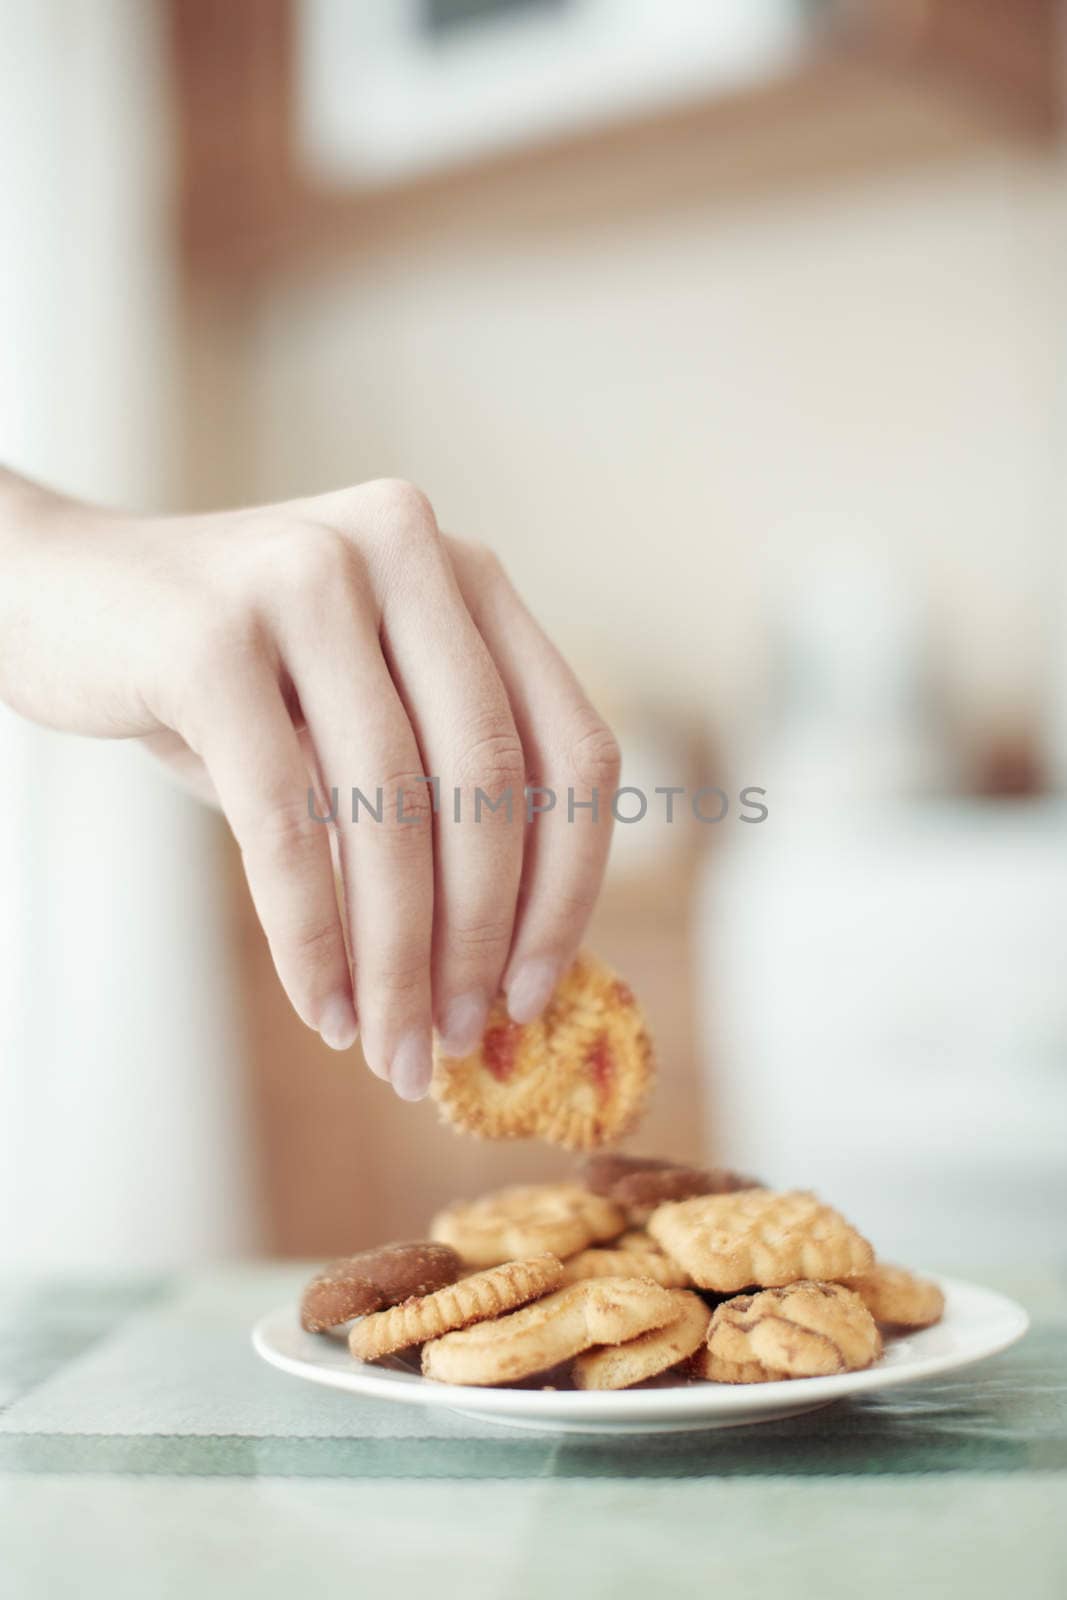 Human hand taking cookie in plate on a table